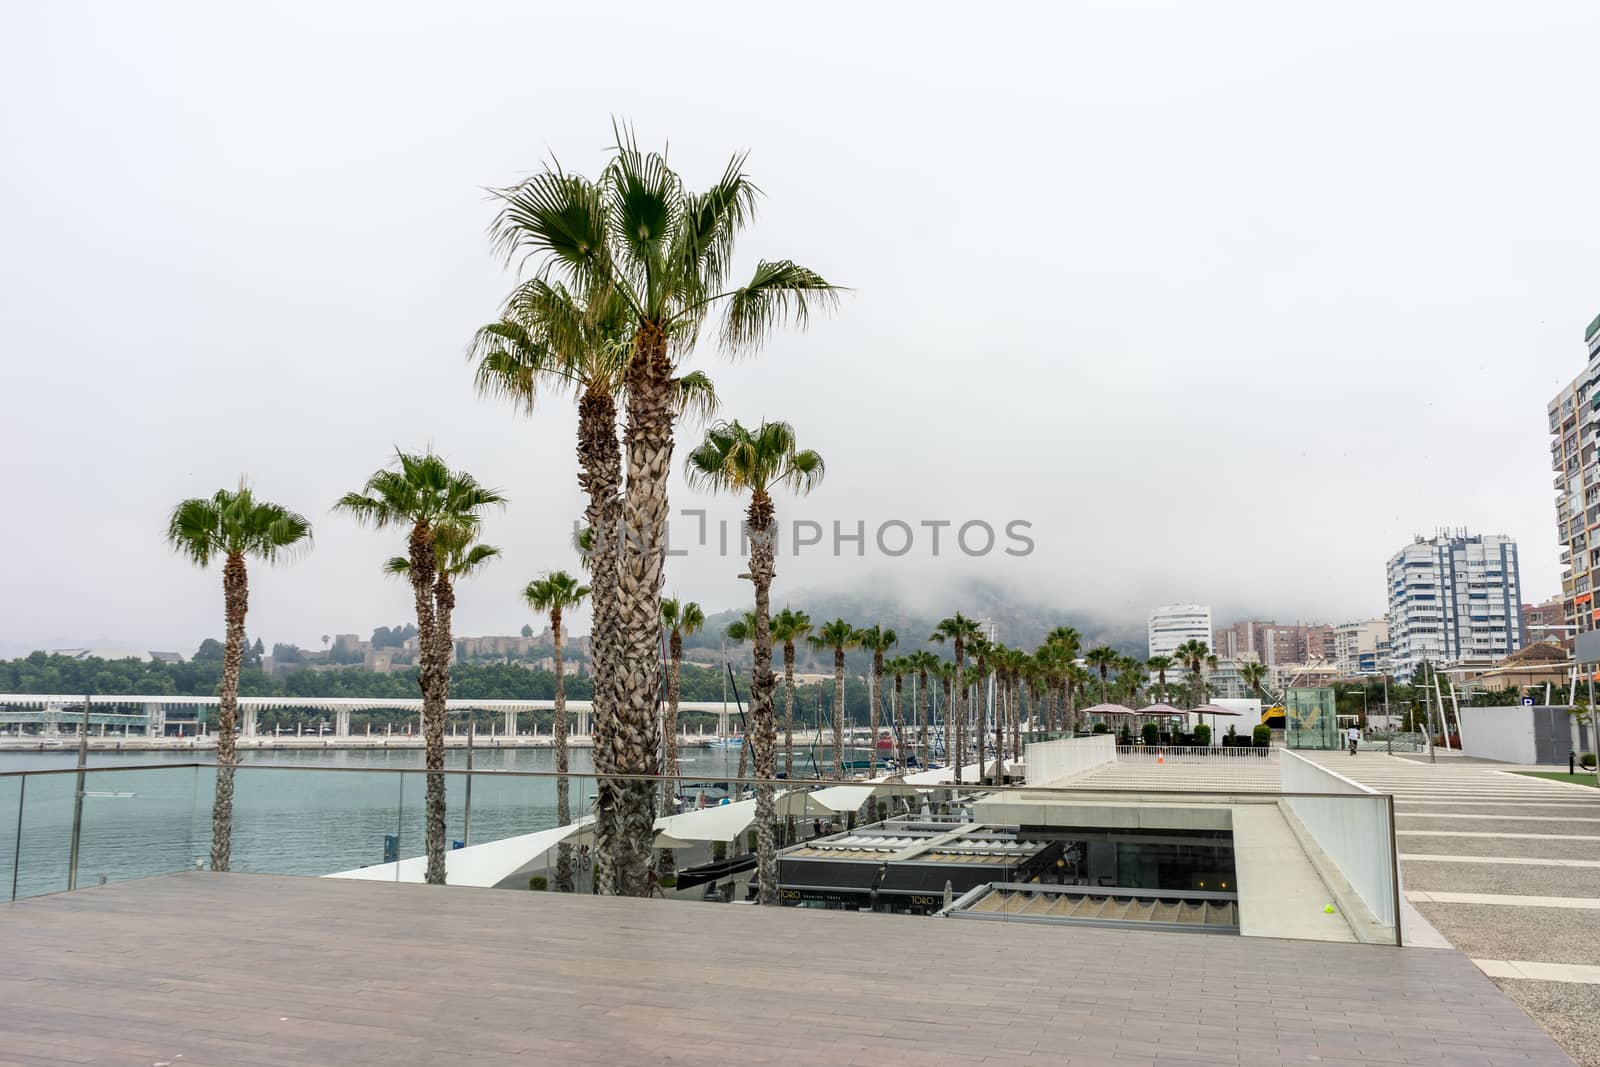 Palm trees along the Malagueta beach in front a fog covered hill in Malaga, Spain, Europe on a cloudy morning